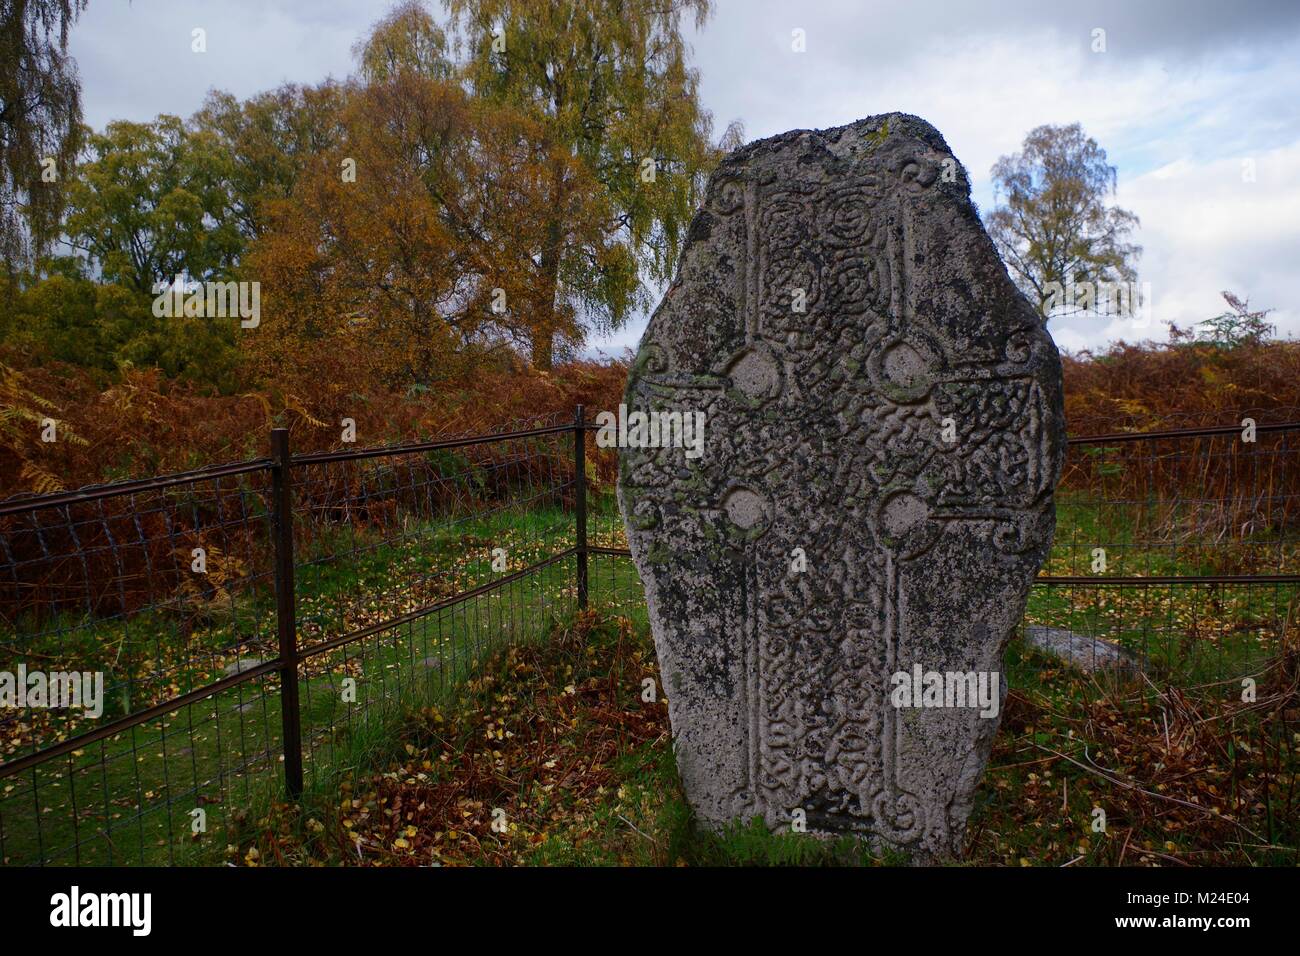 Kinord Cross, Early Christain Carved Stone Slab, Scottish Heritage and Archaeology. Muir of Dinnet, Cairngorms, UK. October, 2017. Stock Photo